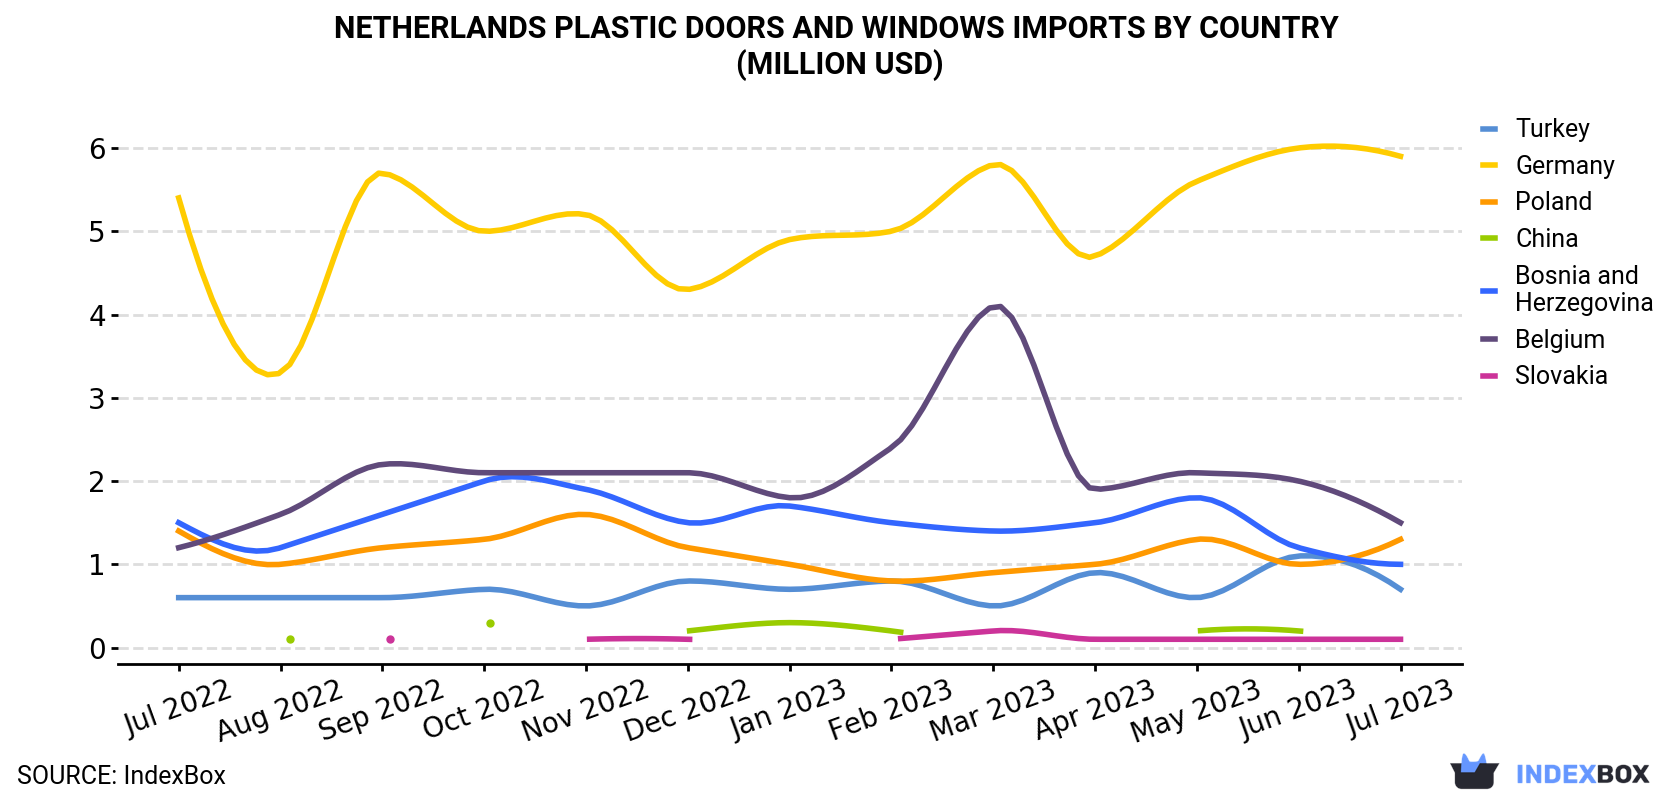 Netherlands Plastic Doors And Windows Imports By Country (Million USD)